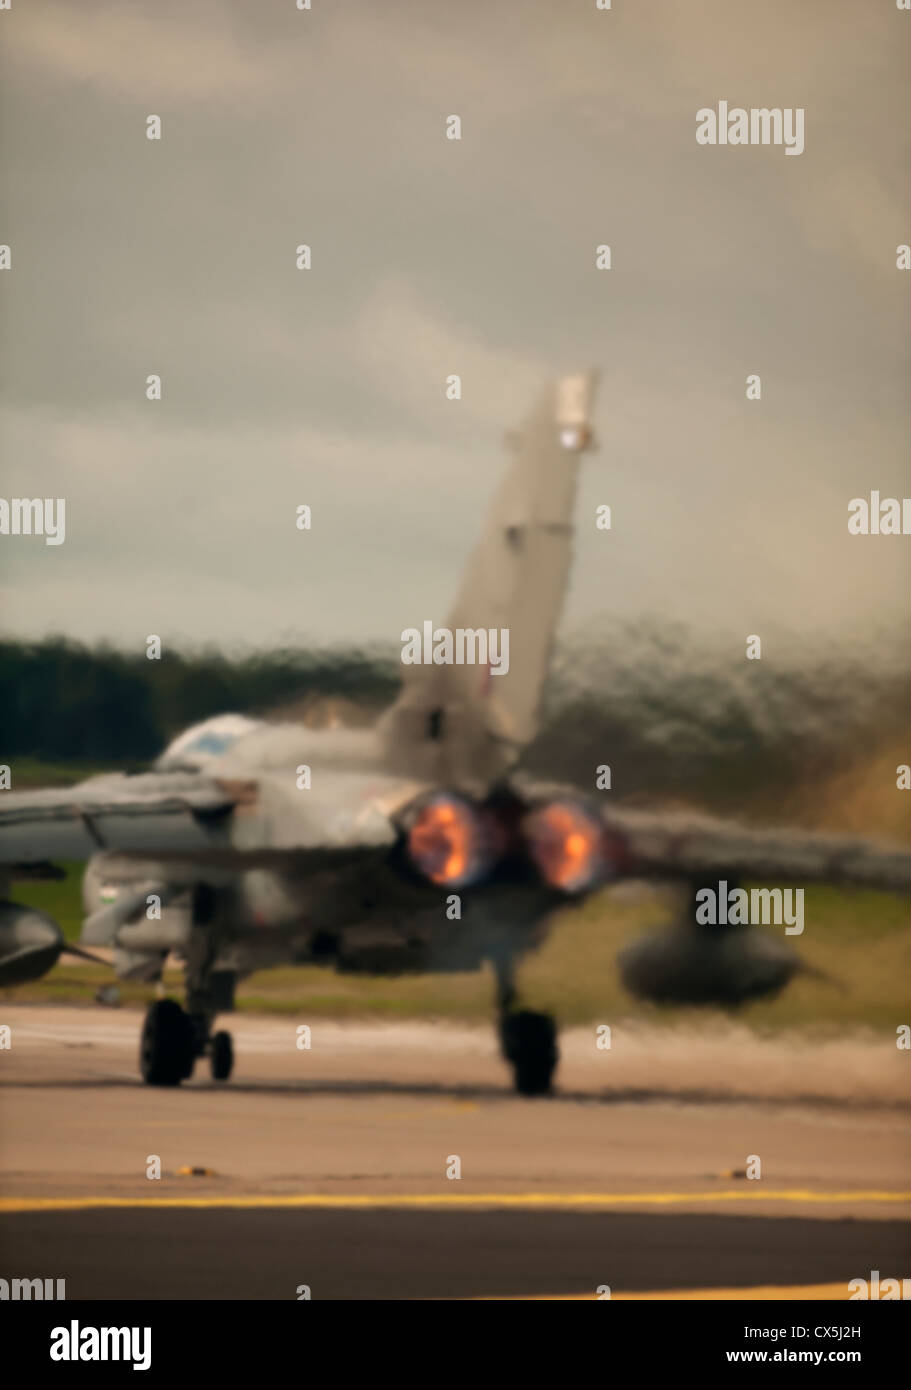 Panavia GR4 Tornado with afterburners lit for maximum thrust at take off.  SCO 8499 Stock Photo